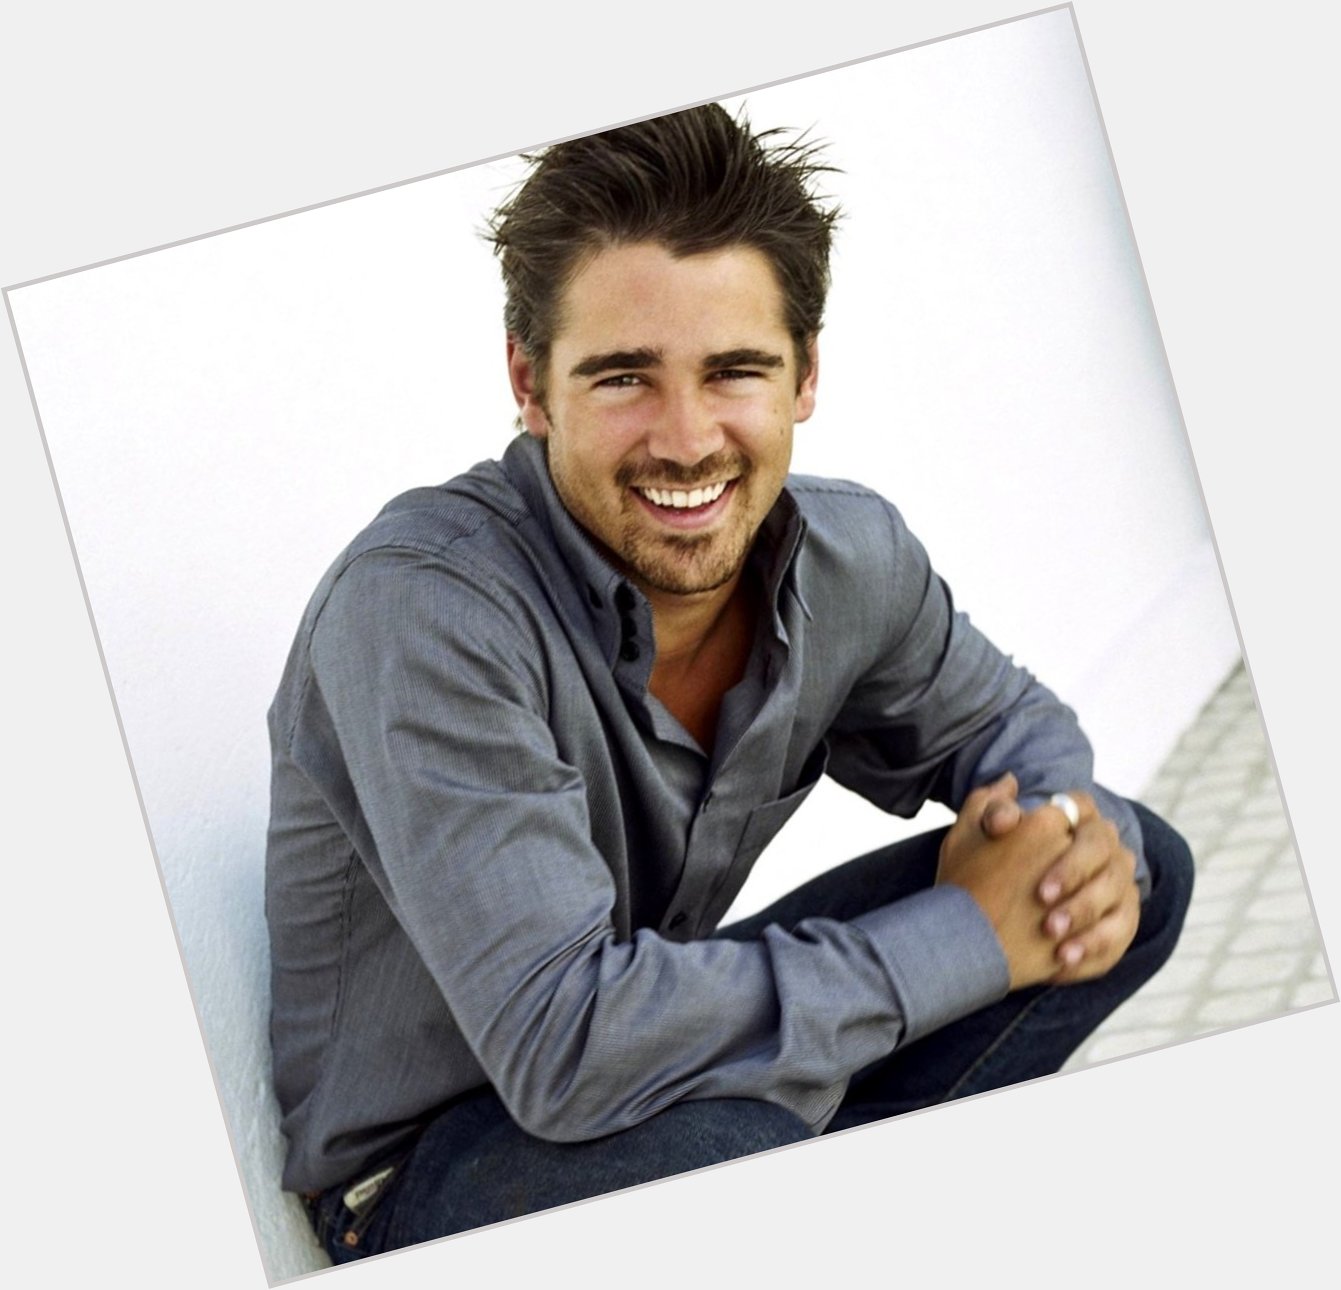 Those Irish eyes combined with that smile         . HAPPY BIRTHDAY COLIN FARRELL          